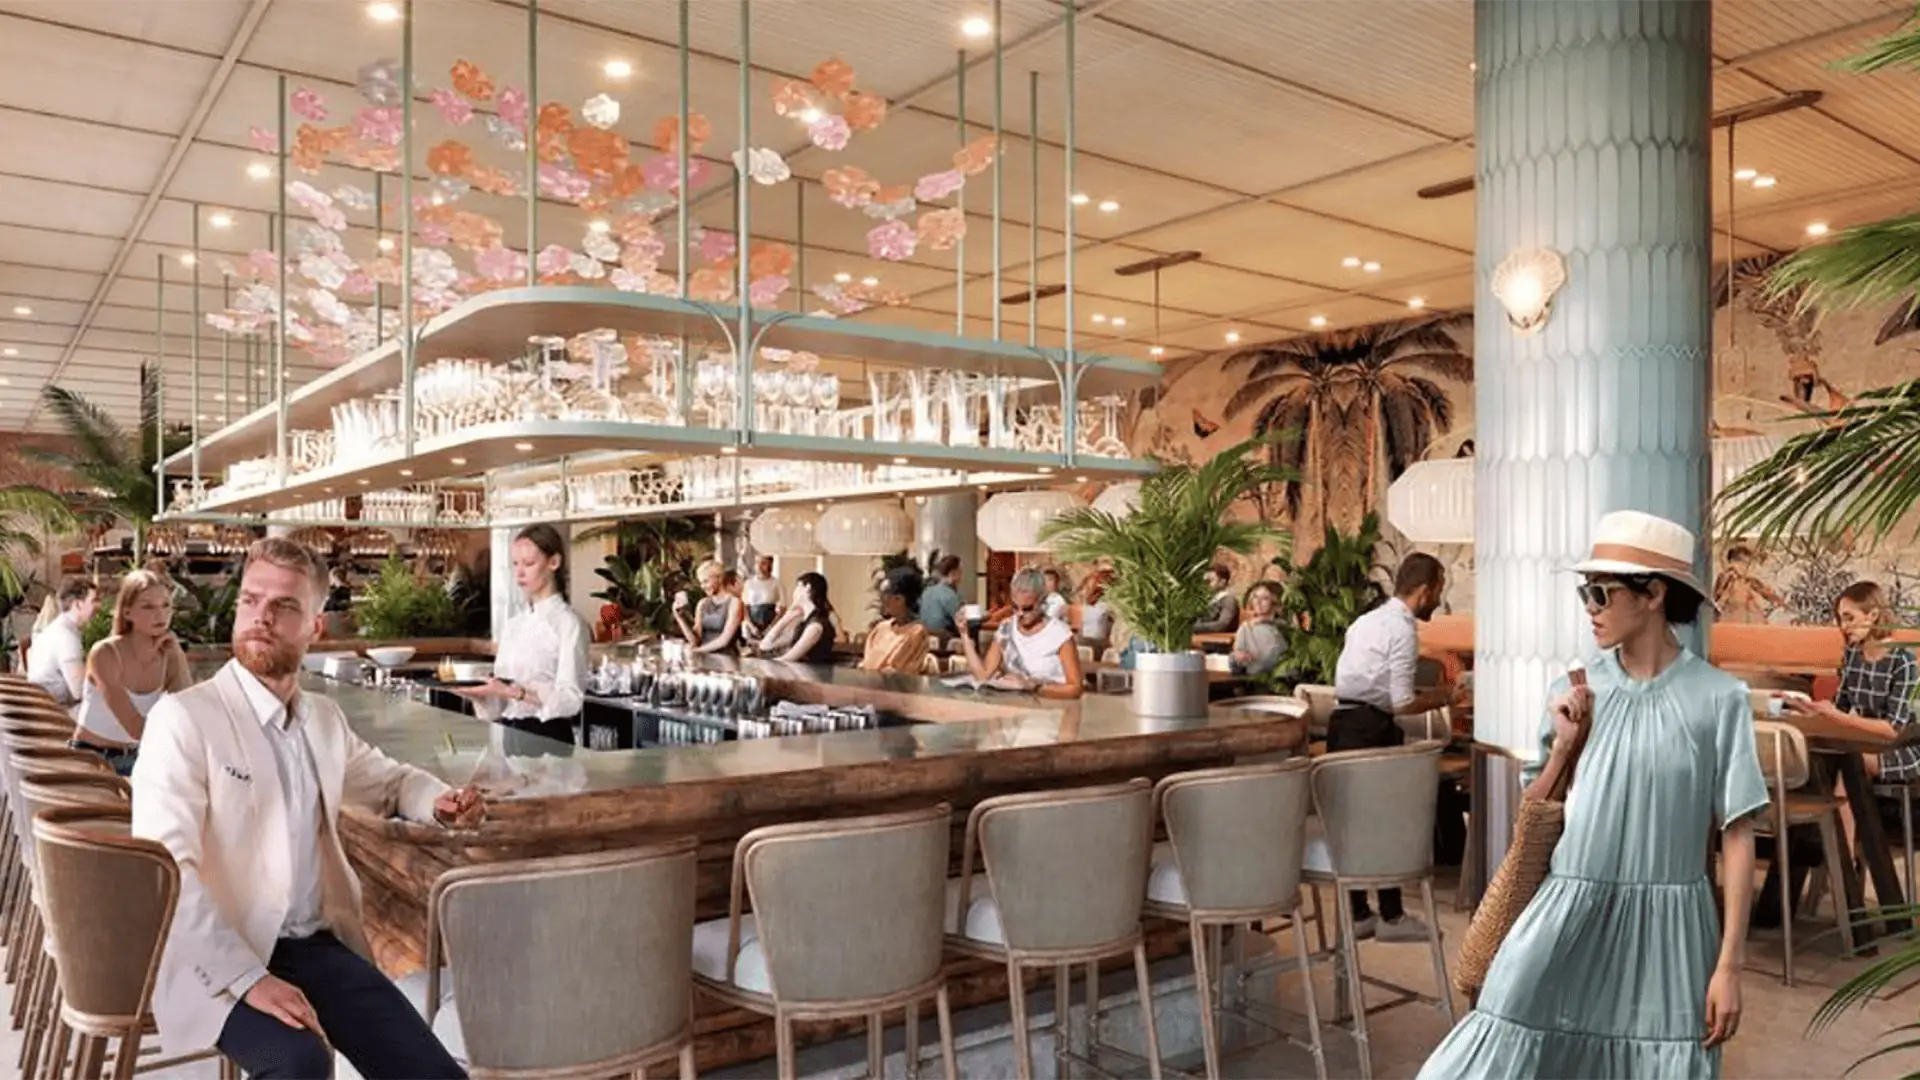 Rendering inside a restaurant with a floral arrangement above the bar